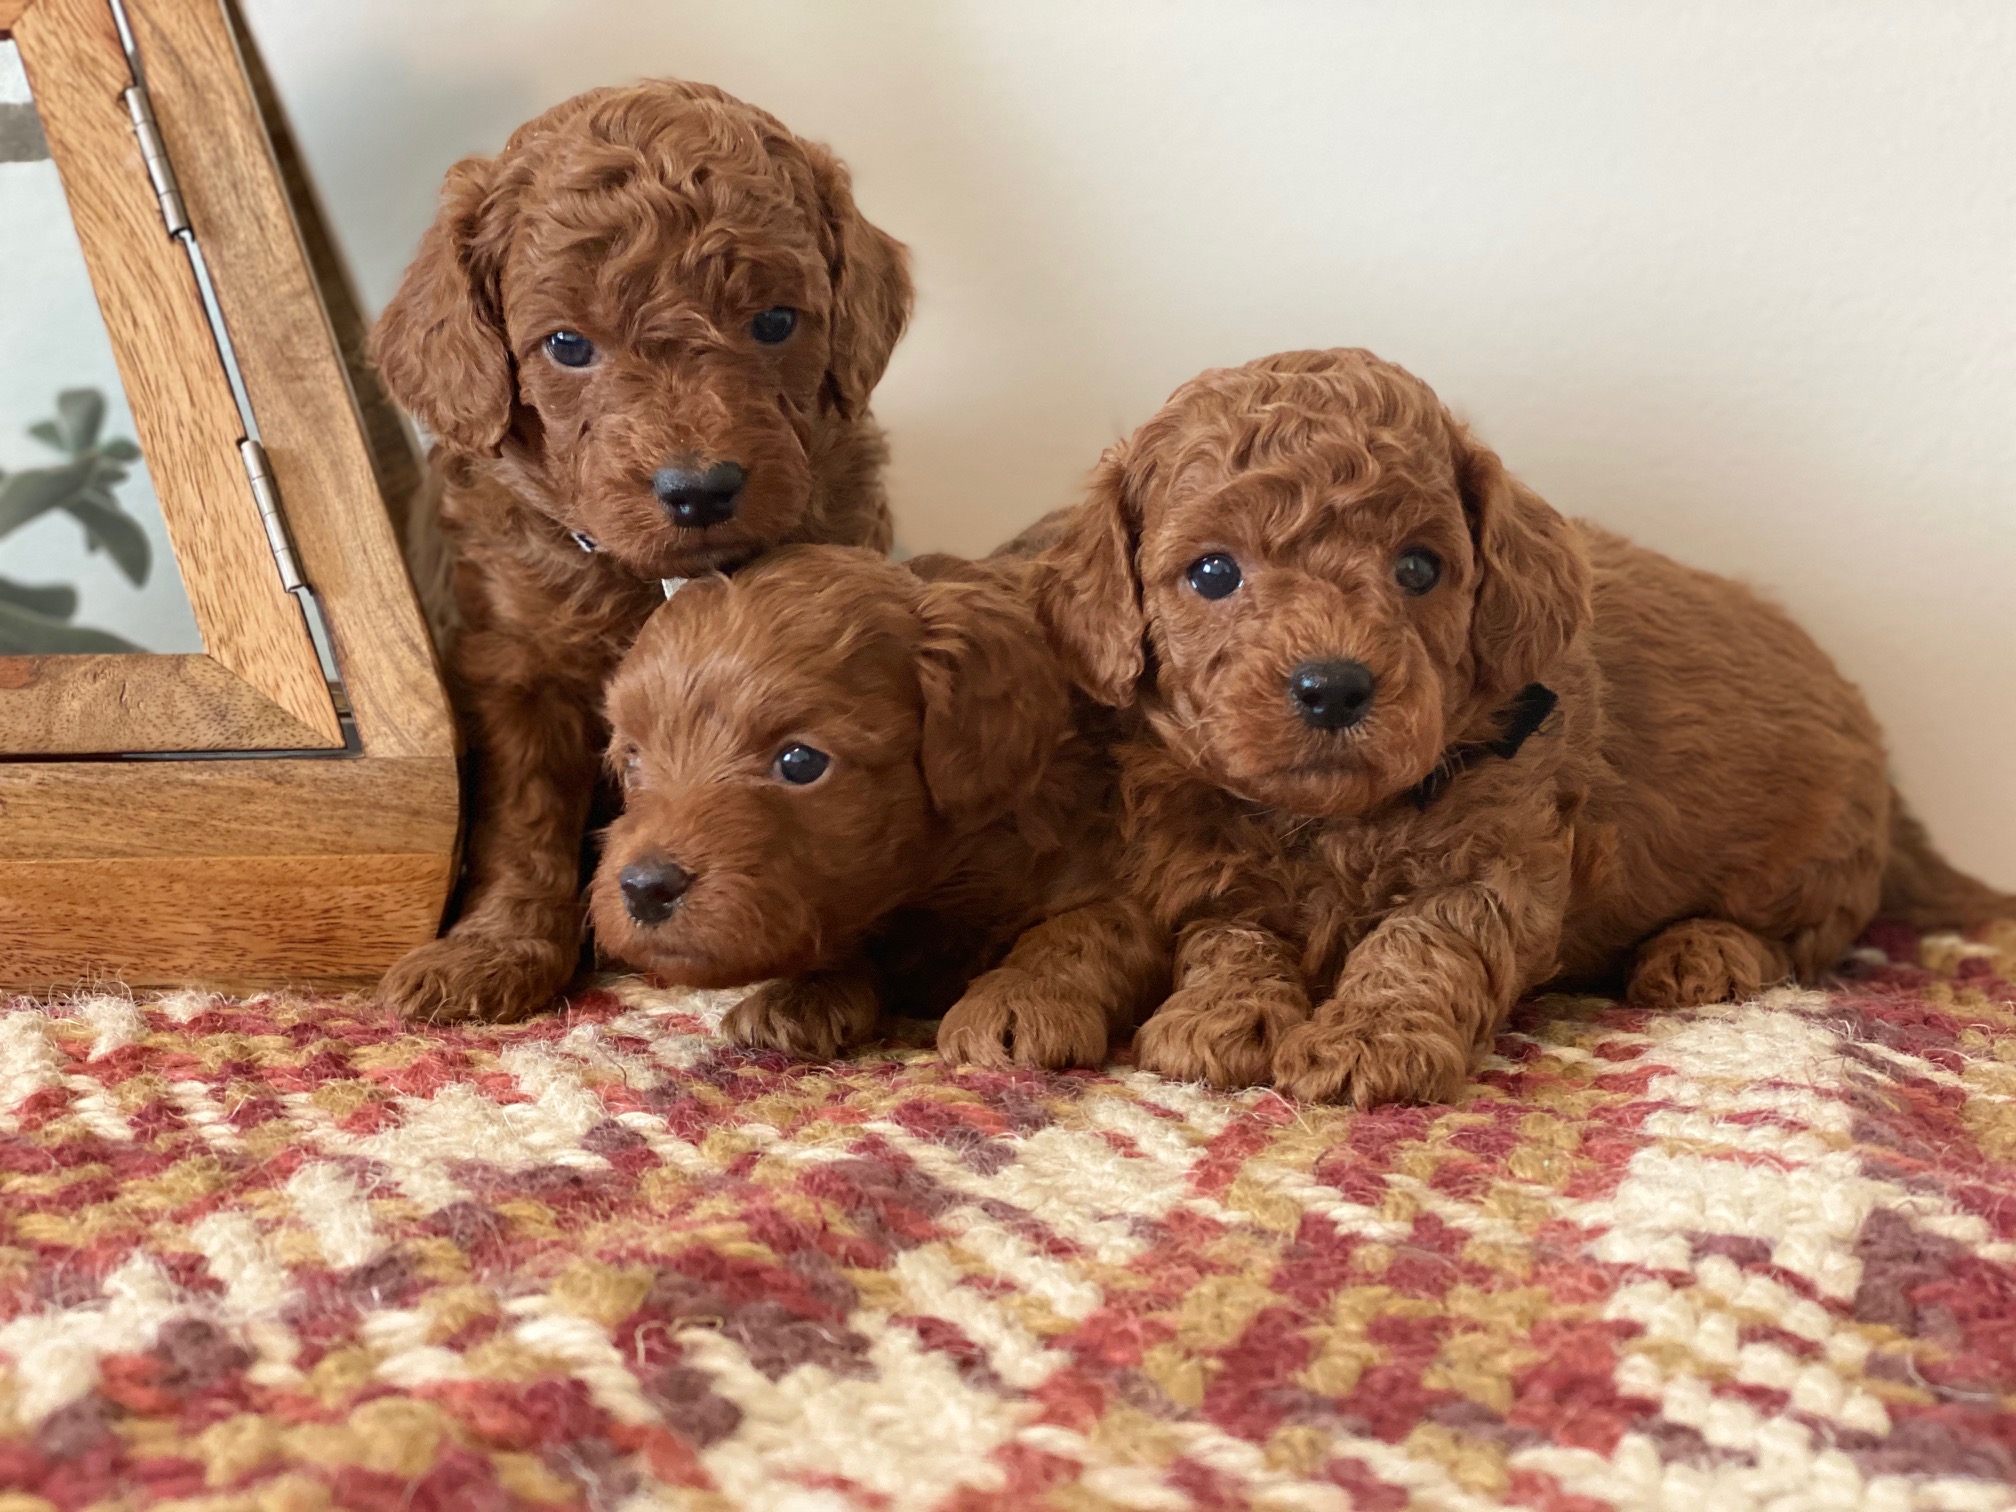 Three young brown poodle puppies are sitting on a soft rug, looking up at the camera with curious expressions. - How To Care For Goldendoodle Puppies